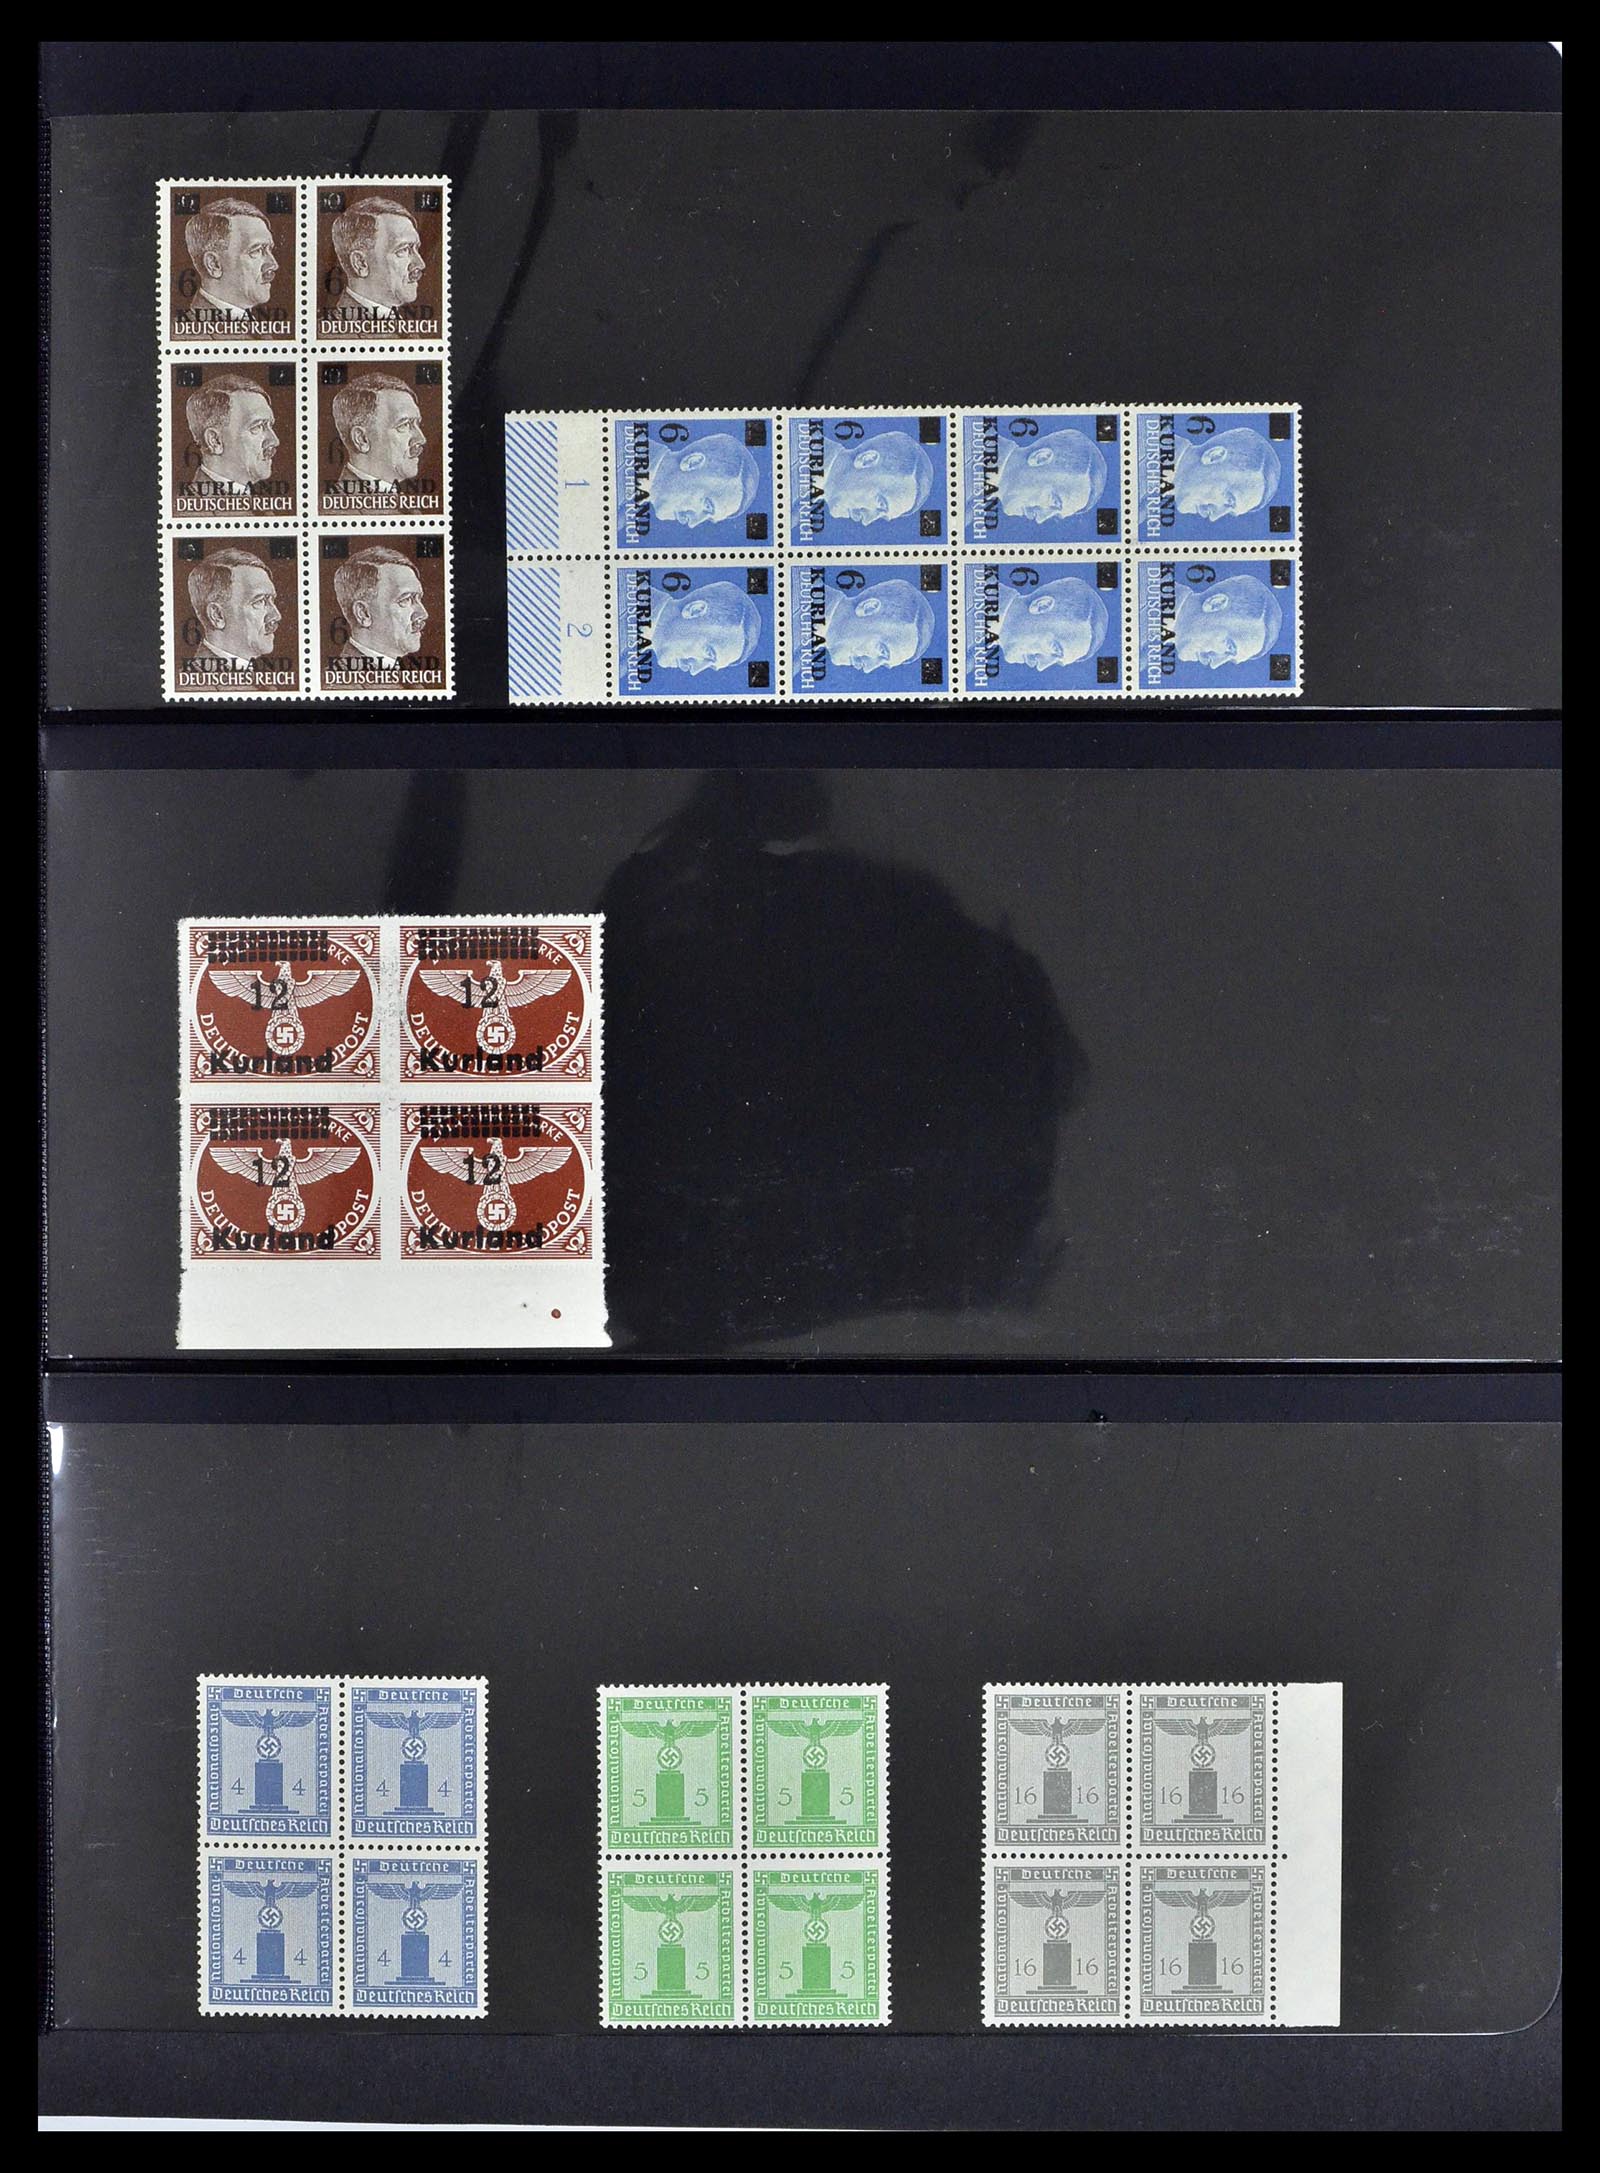 39255 0041 - Stamp collection 39255 German Reich MNH blocks of 4.